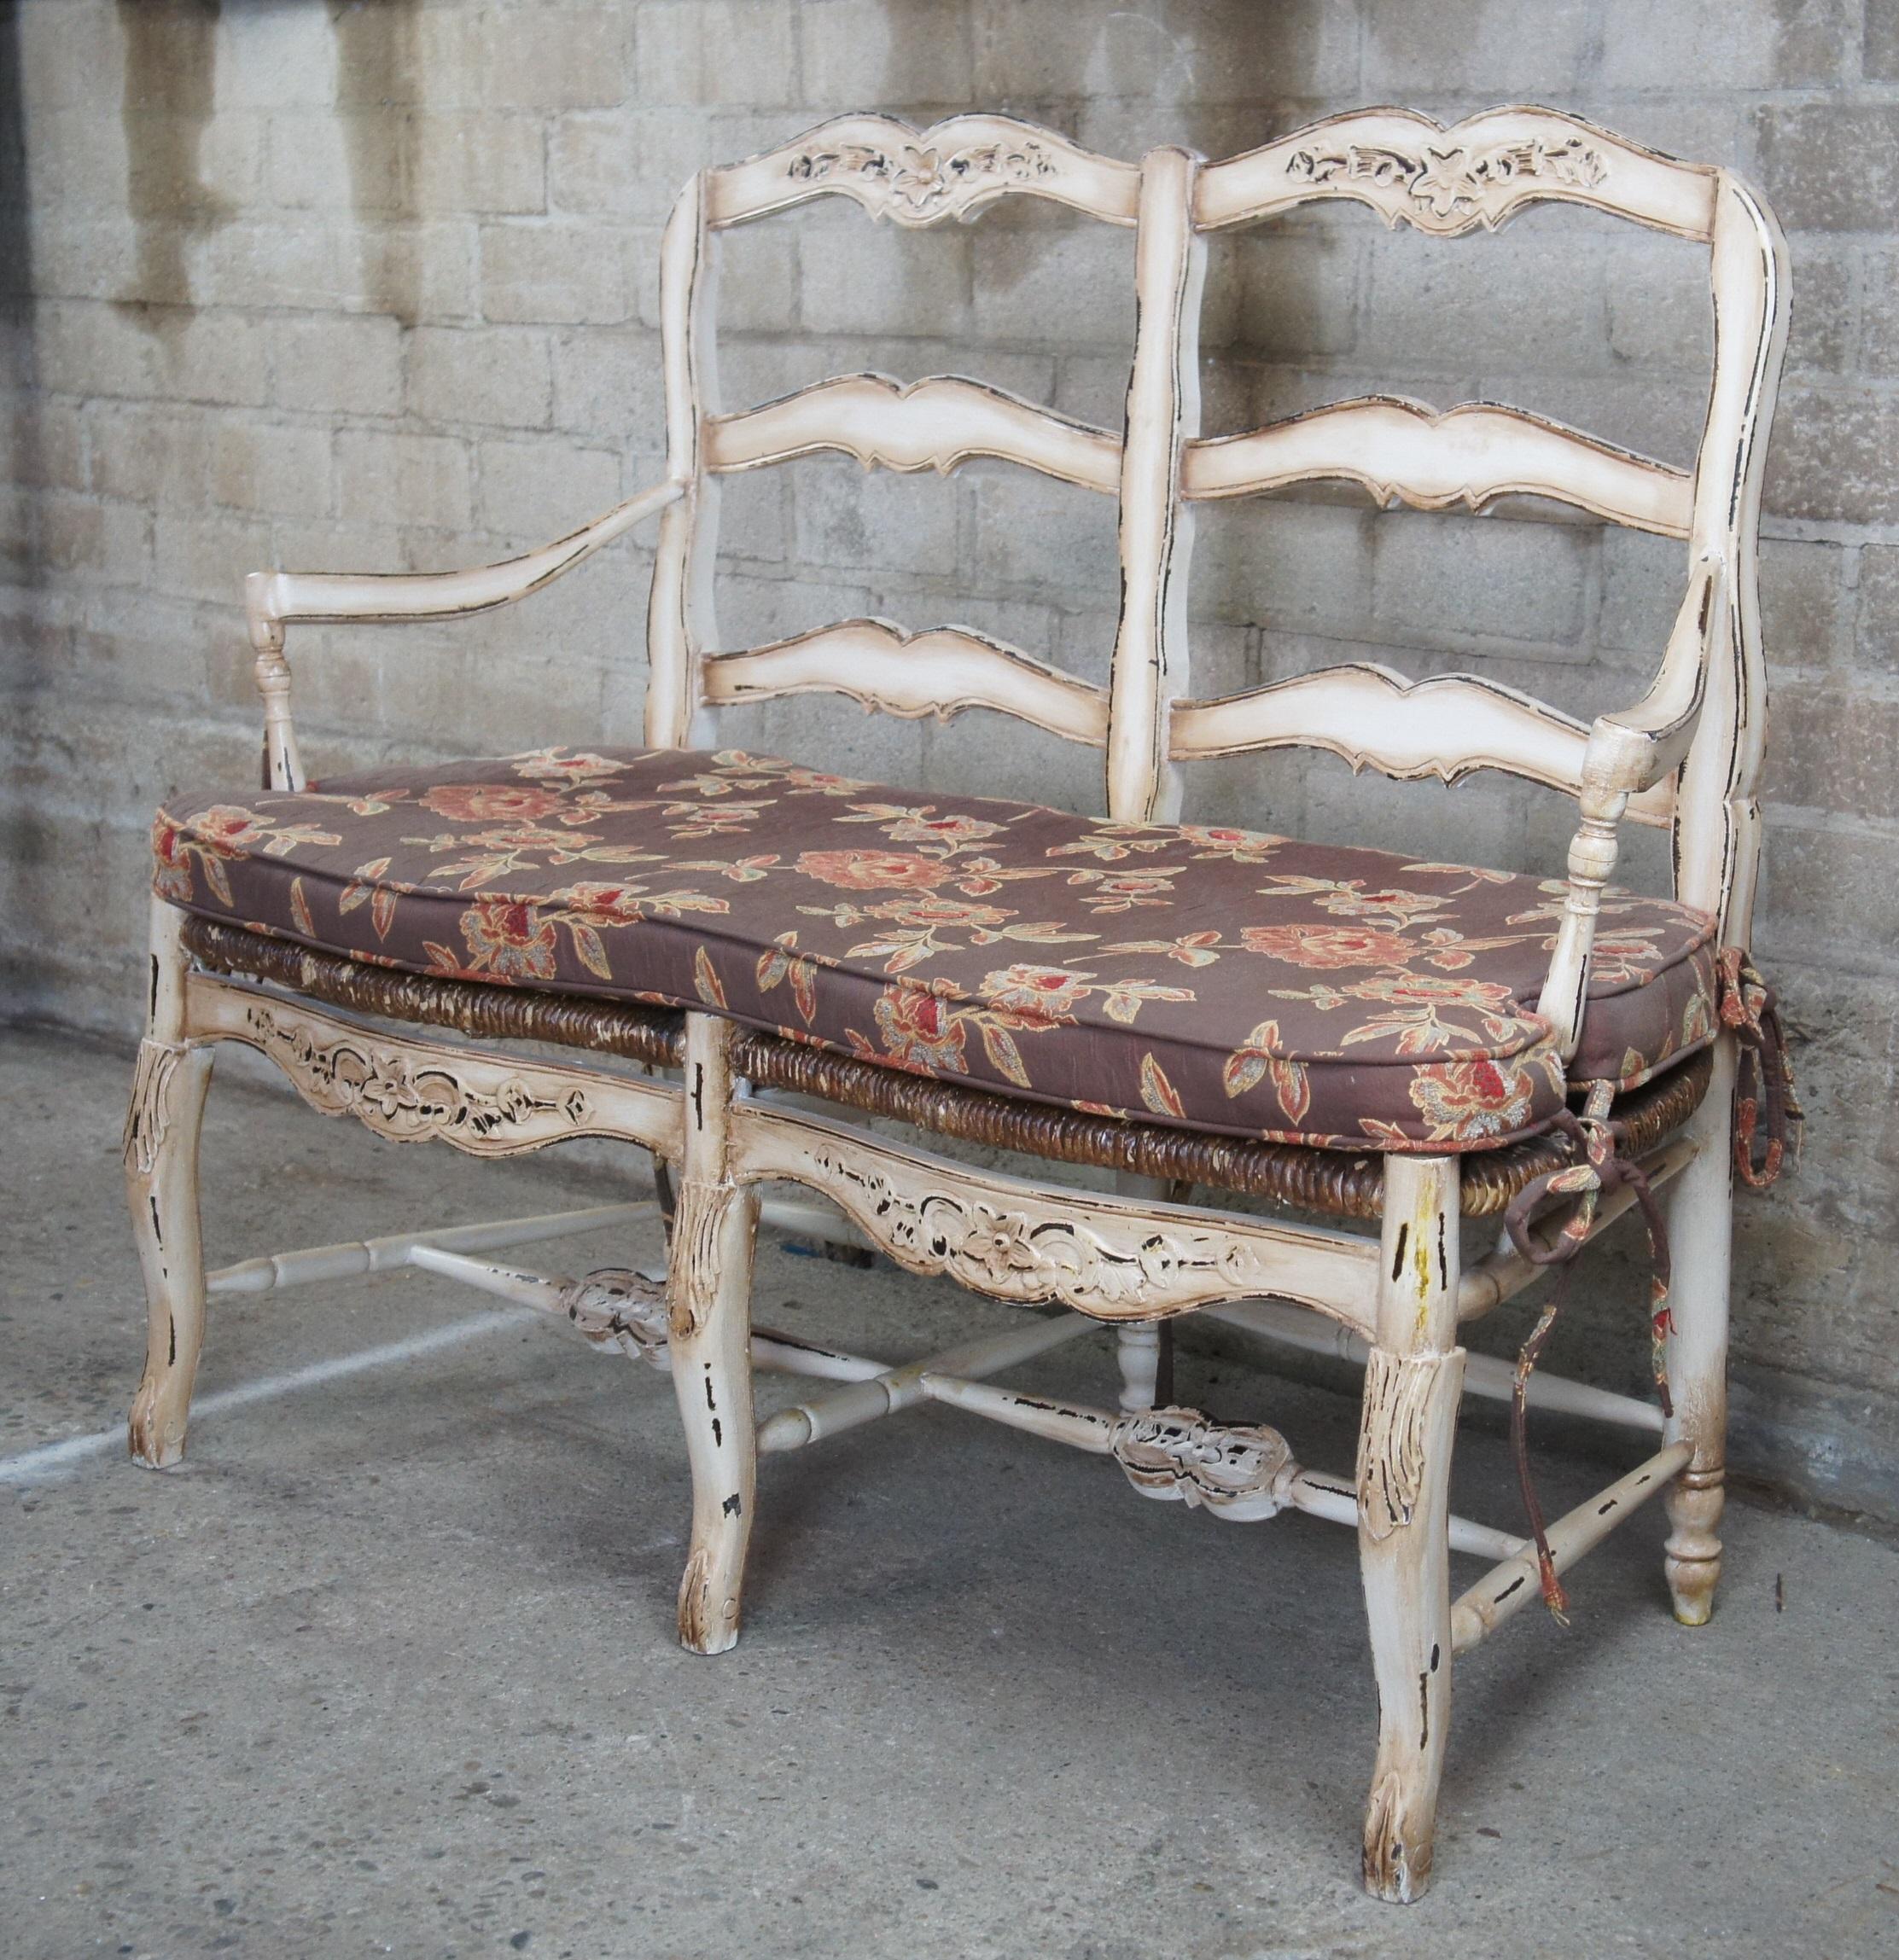 French Provincial Vintage French Country Chic 2 Seater Ladderback Settee Rush Seat & Cushion